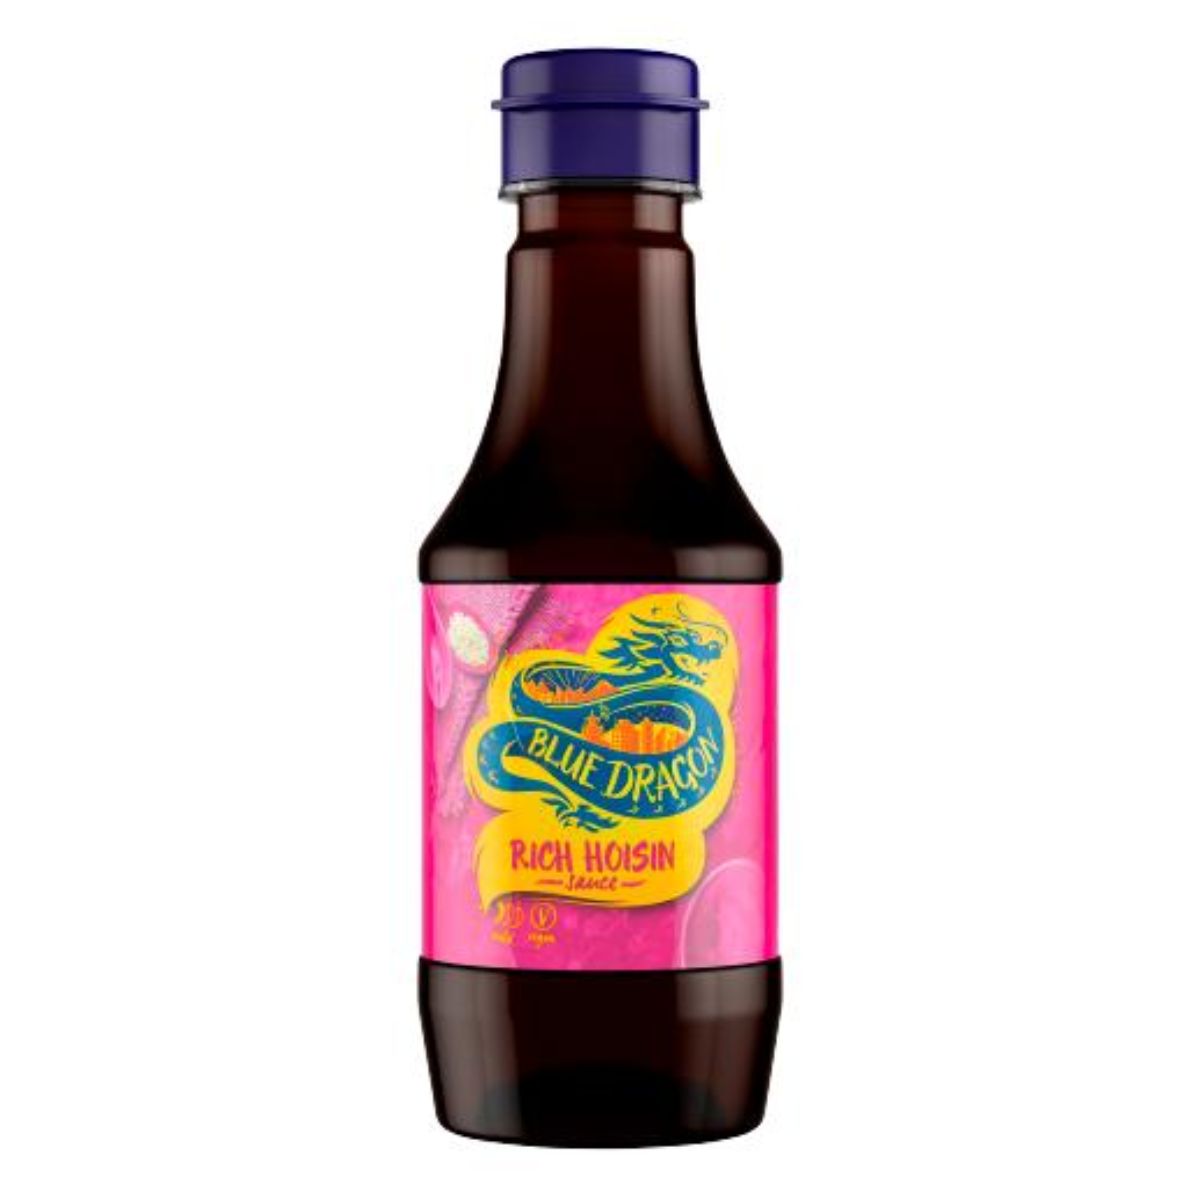 A bottle of Blue Dragon - Rich Hoisin Sauce - 190ml on a white background.